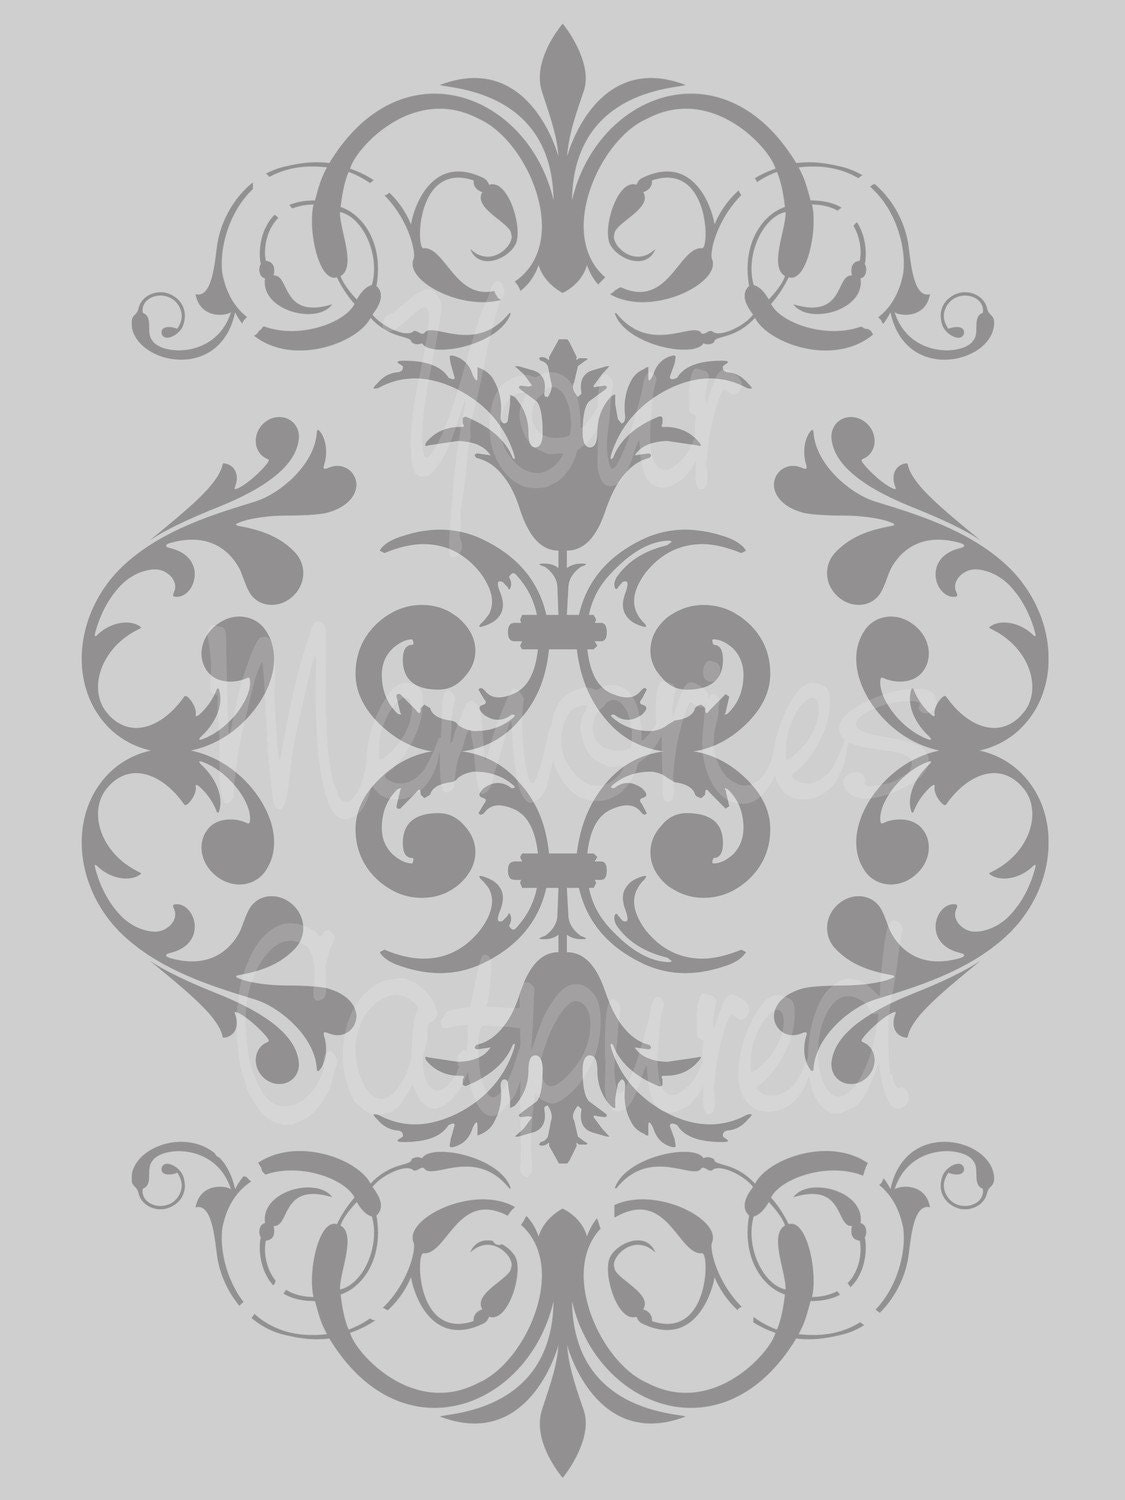 French Damask Flourish A Reusable Stencil - for fabric, wood, paper, canvas, walls - 5.5x8